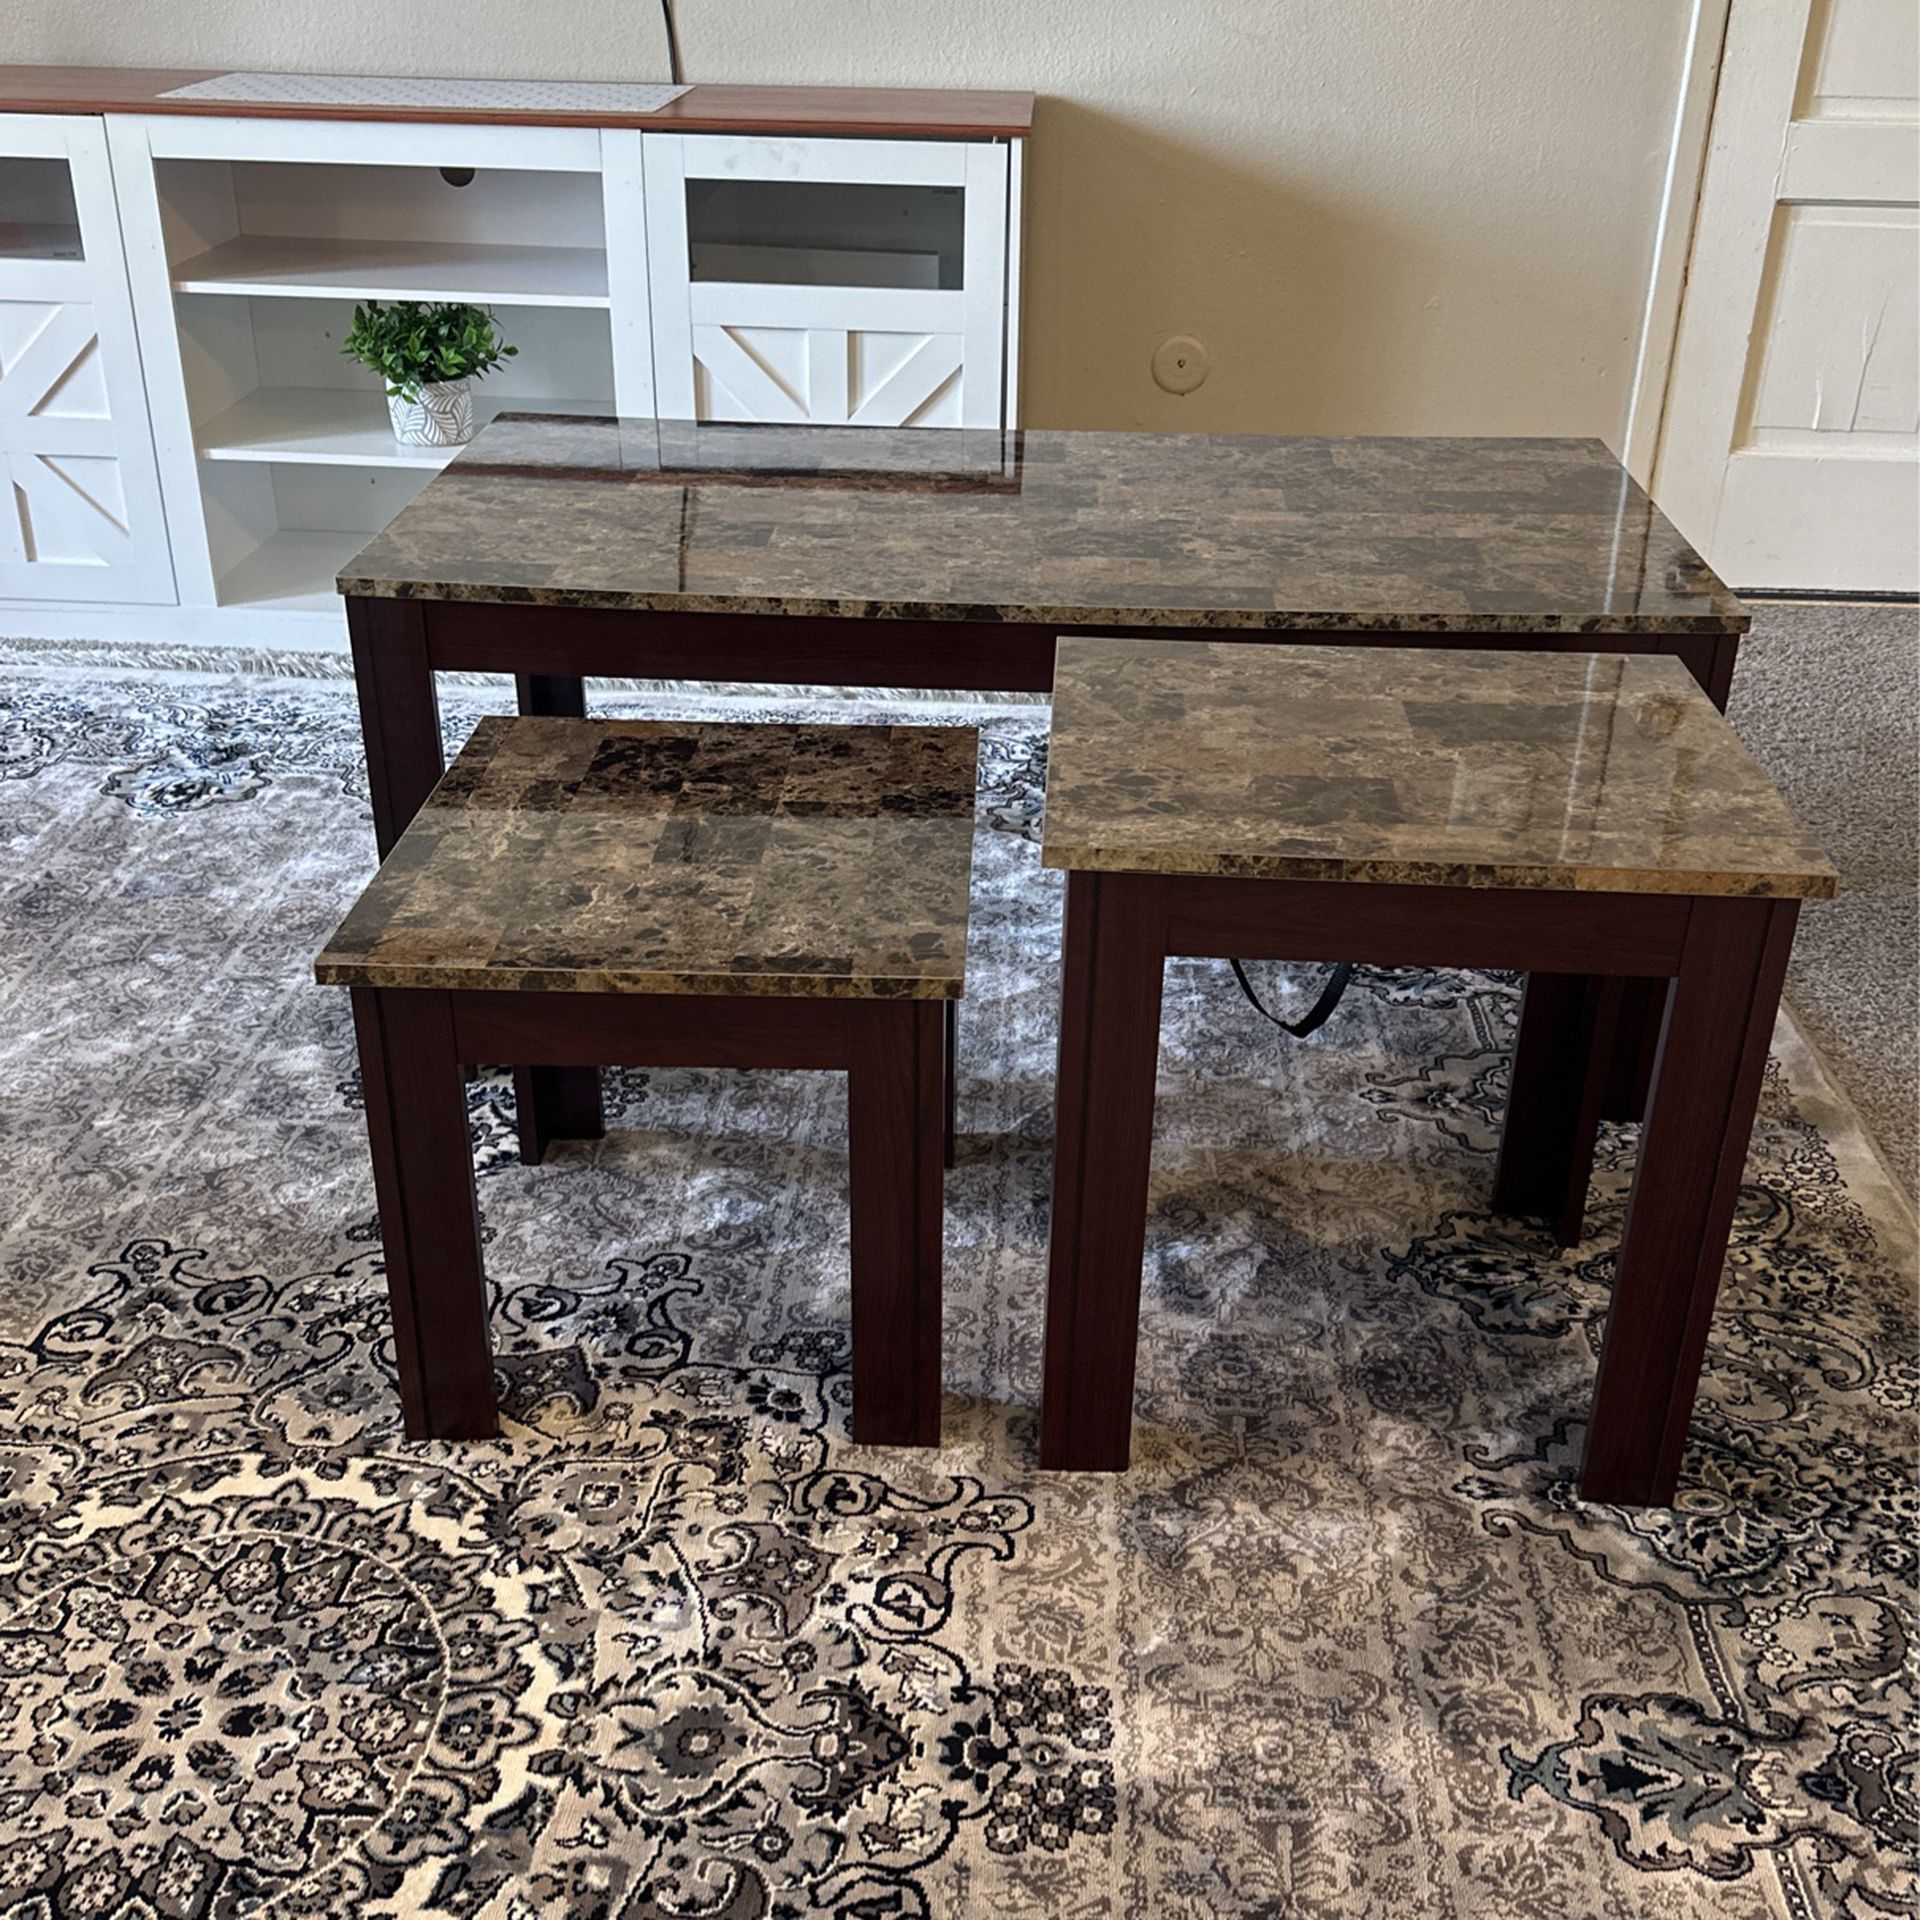 3 Pieces Coffee Table